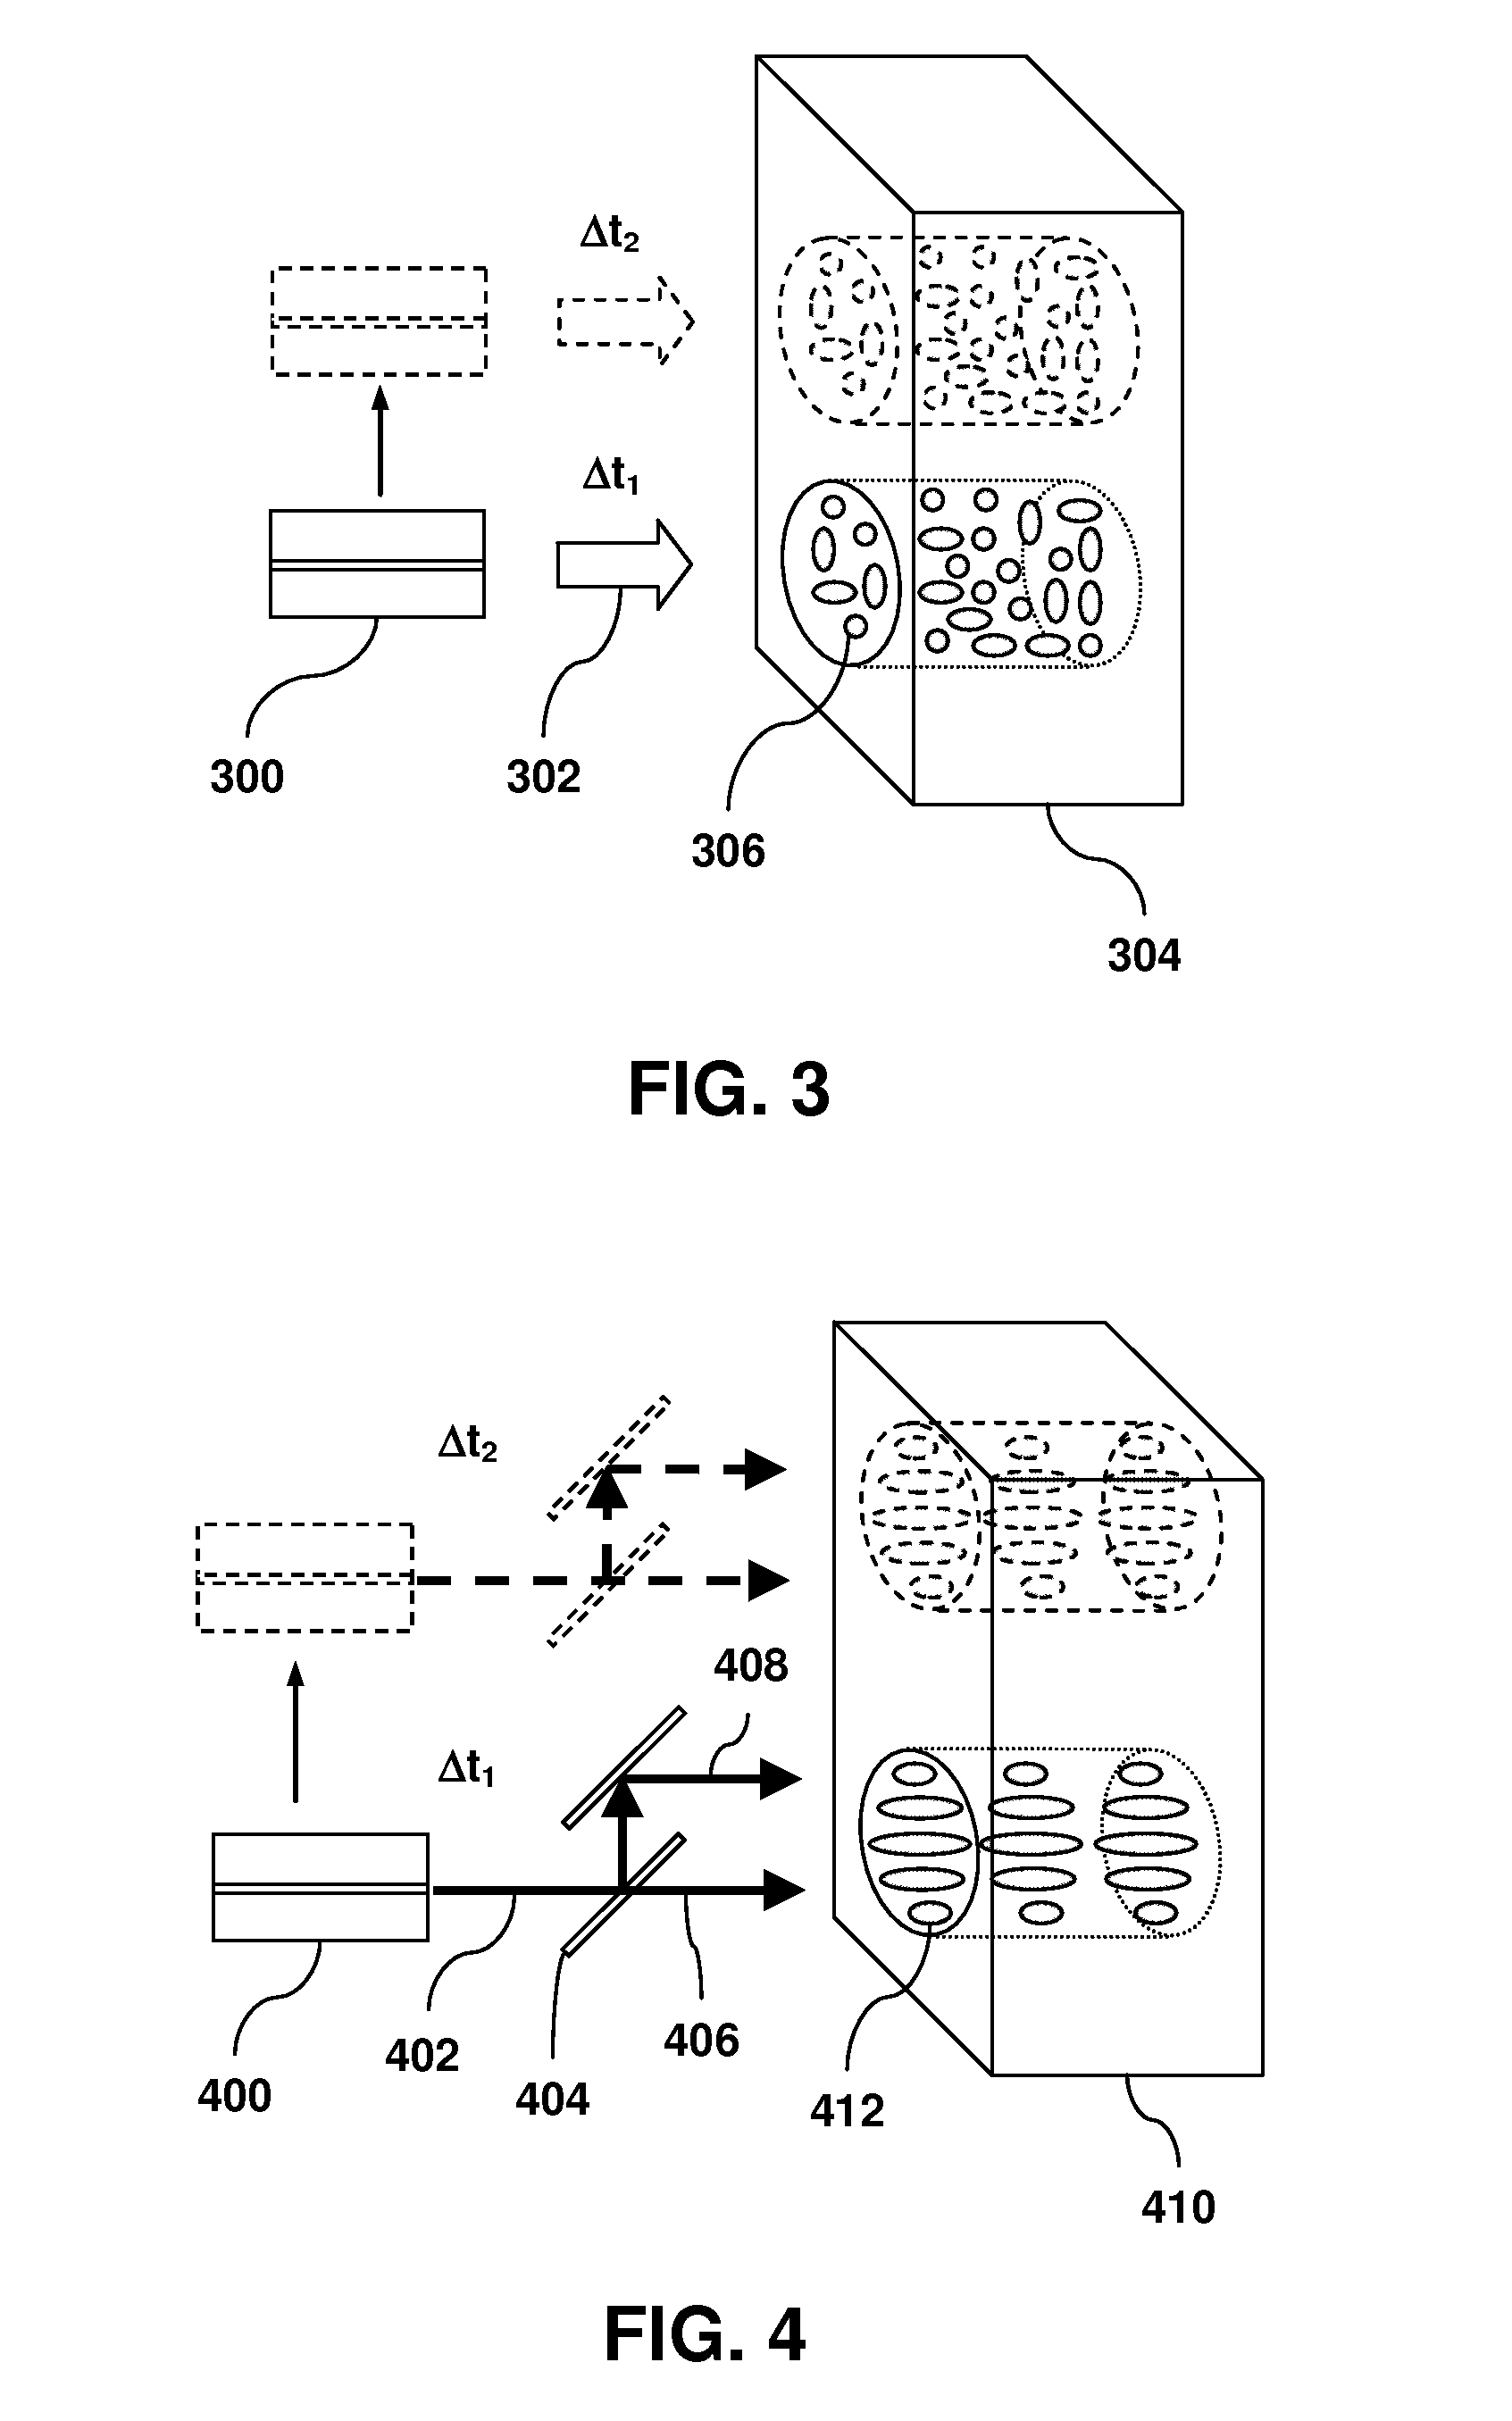 Laser therapy apparatus with controlled optical coherence